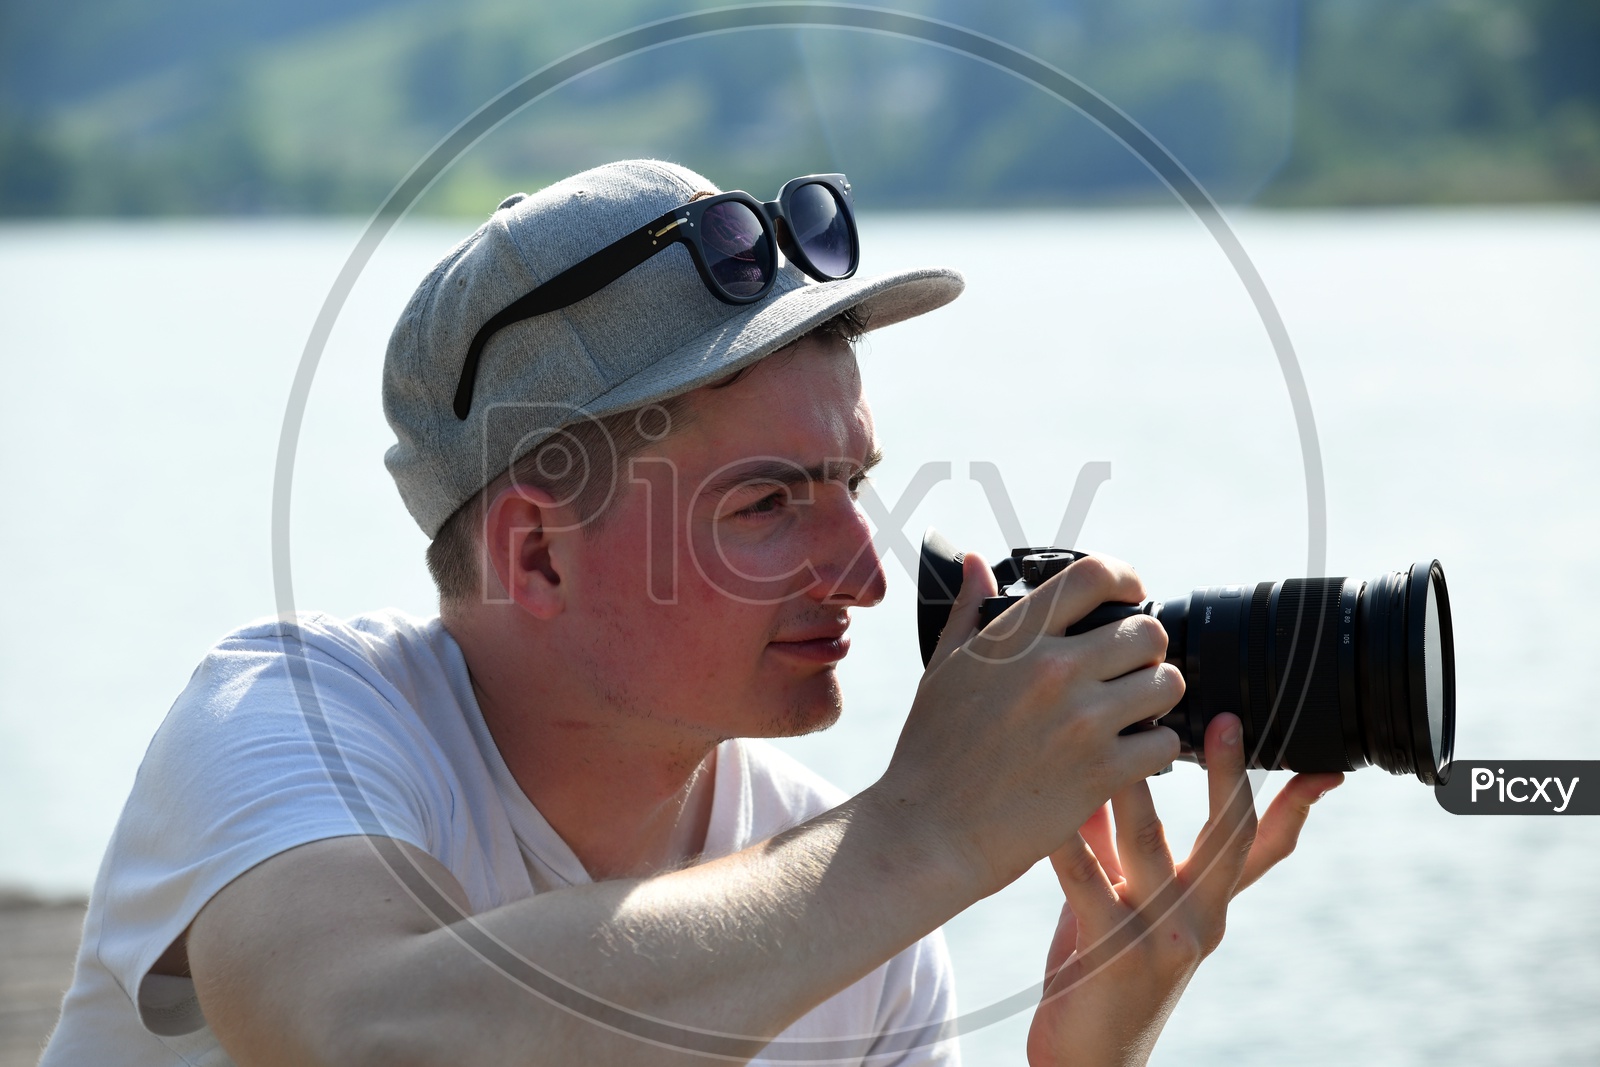 A Photographer With DSLR Camera